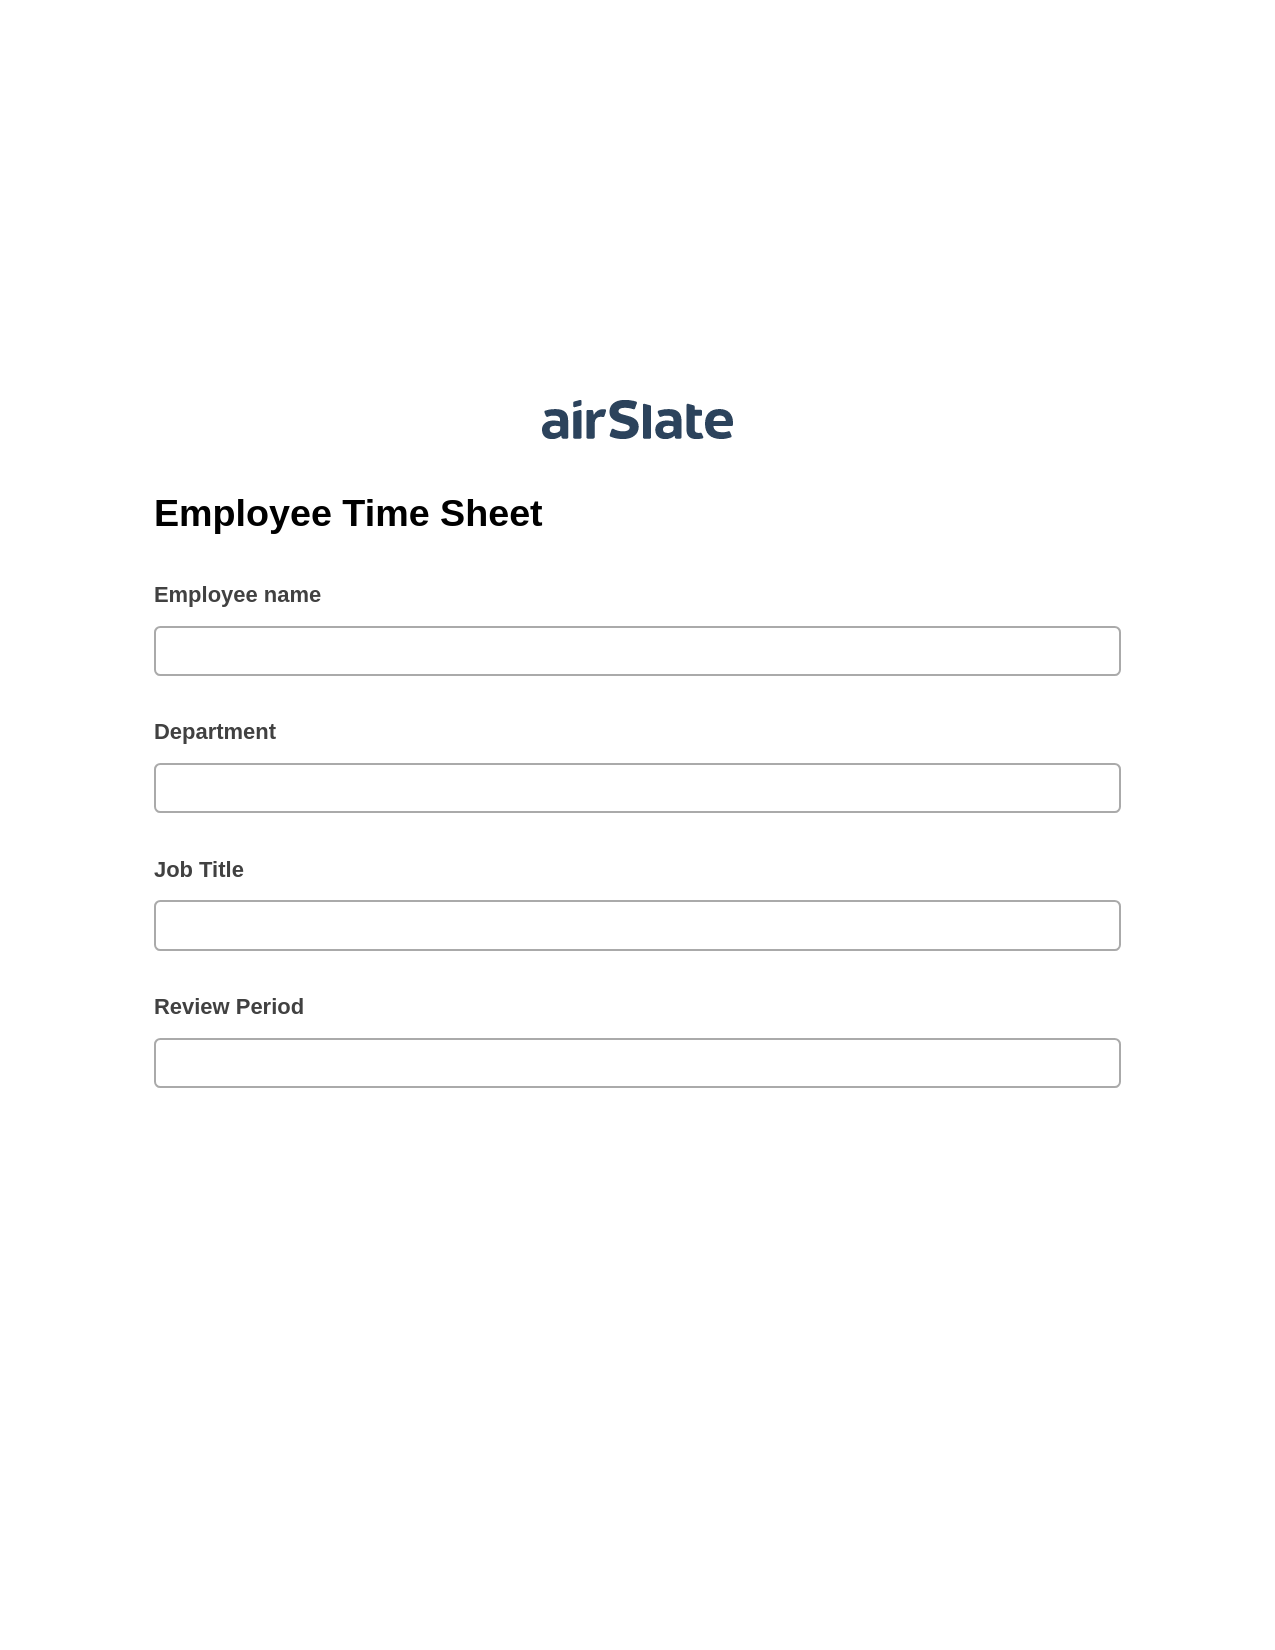 Employee Time Sheet Pre-fill from MS Dynamics 365 Records, Google Calendar Bot, Archive to SharePoint Folder Bot